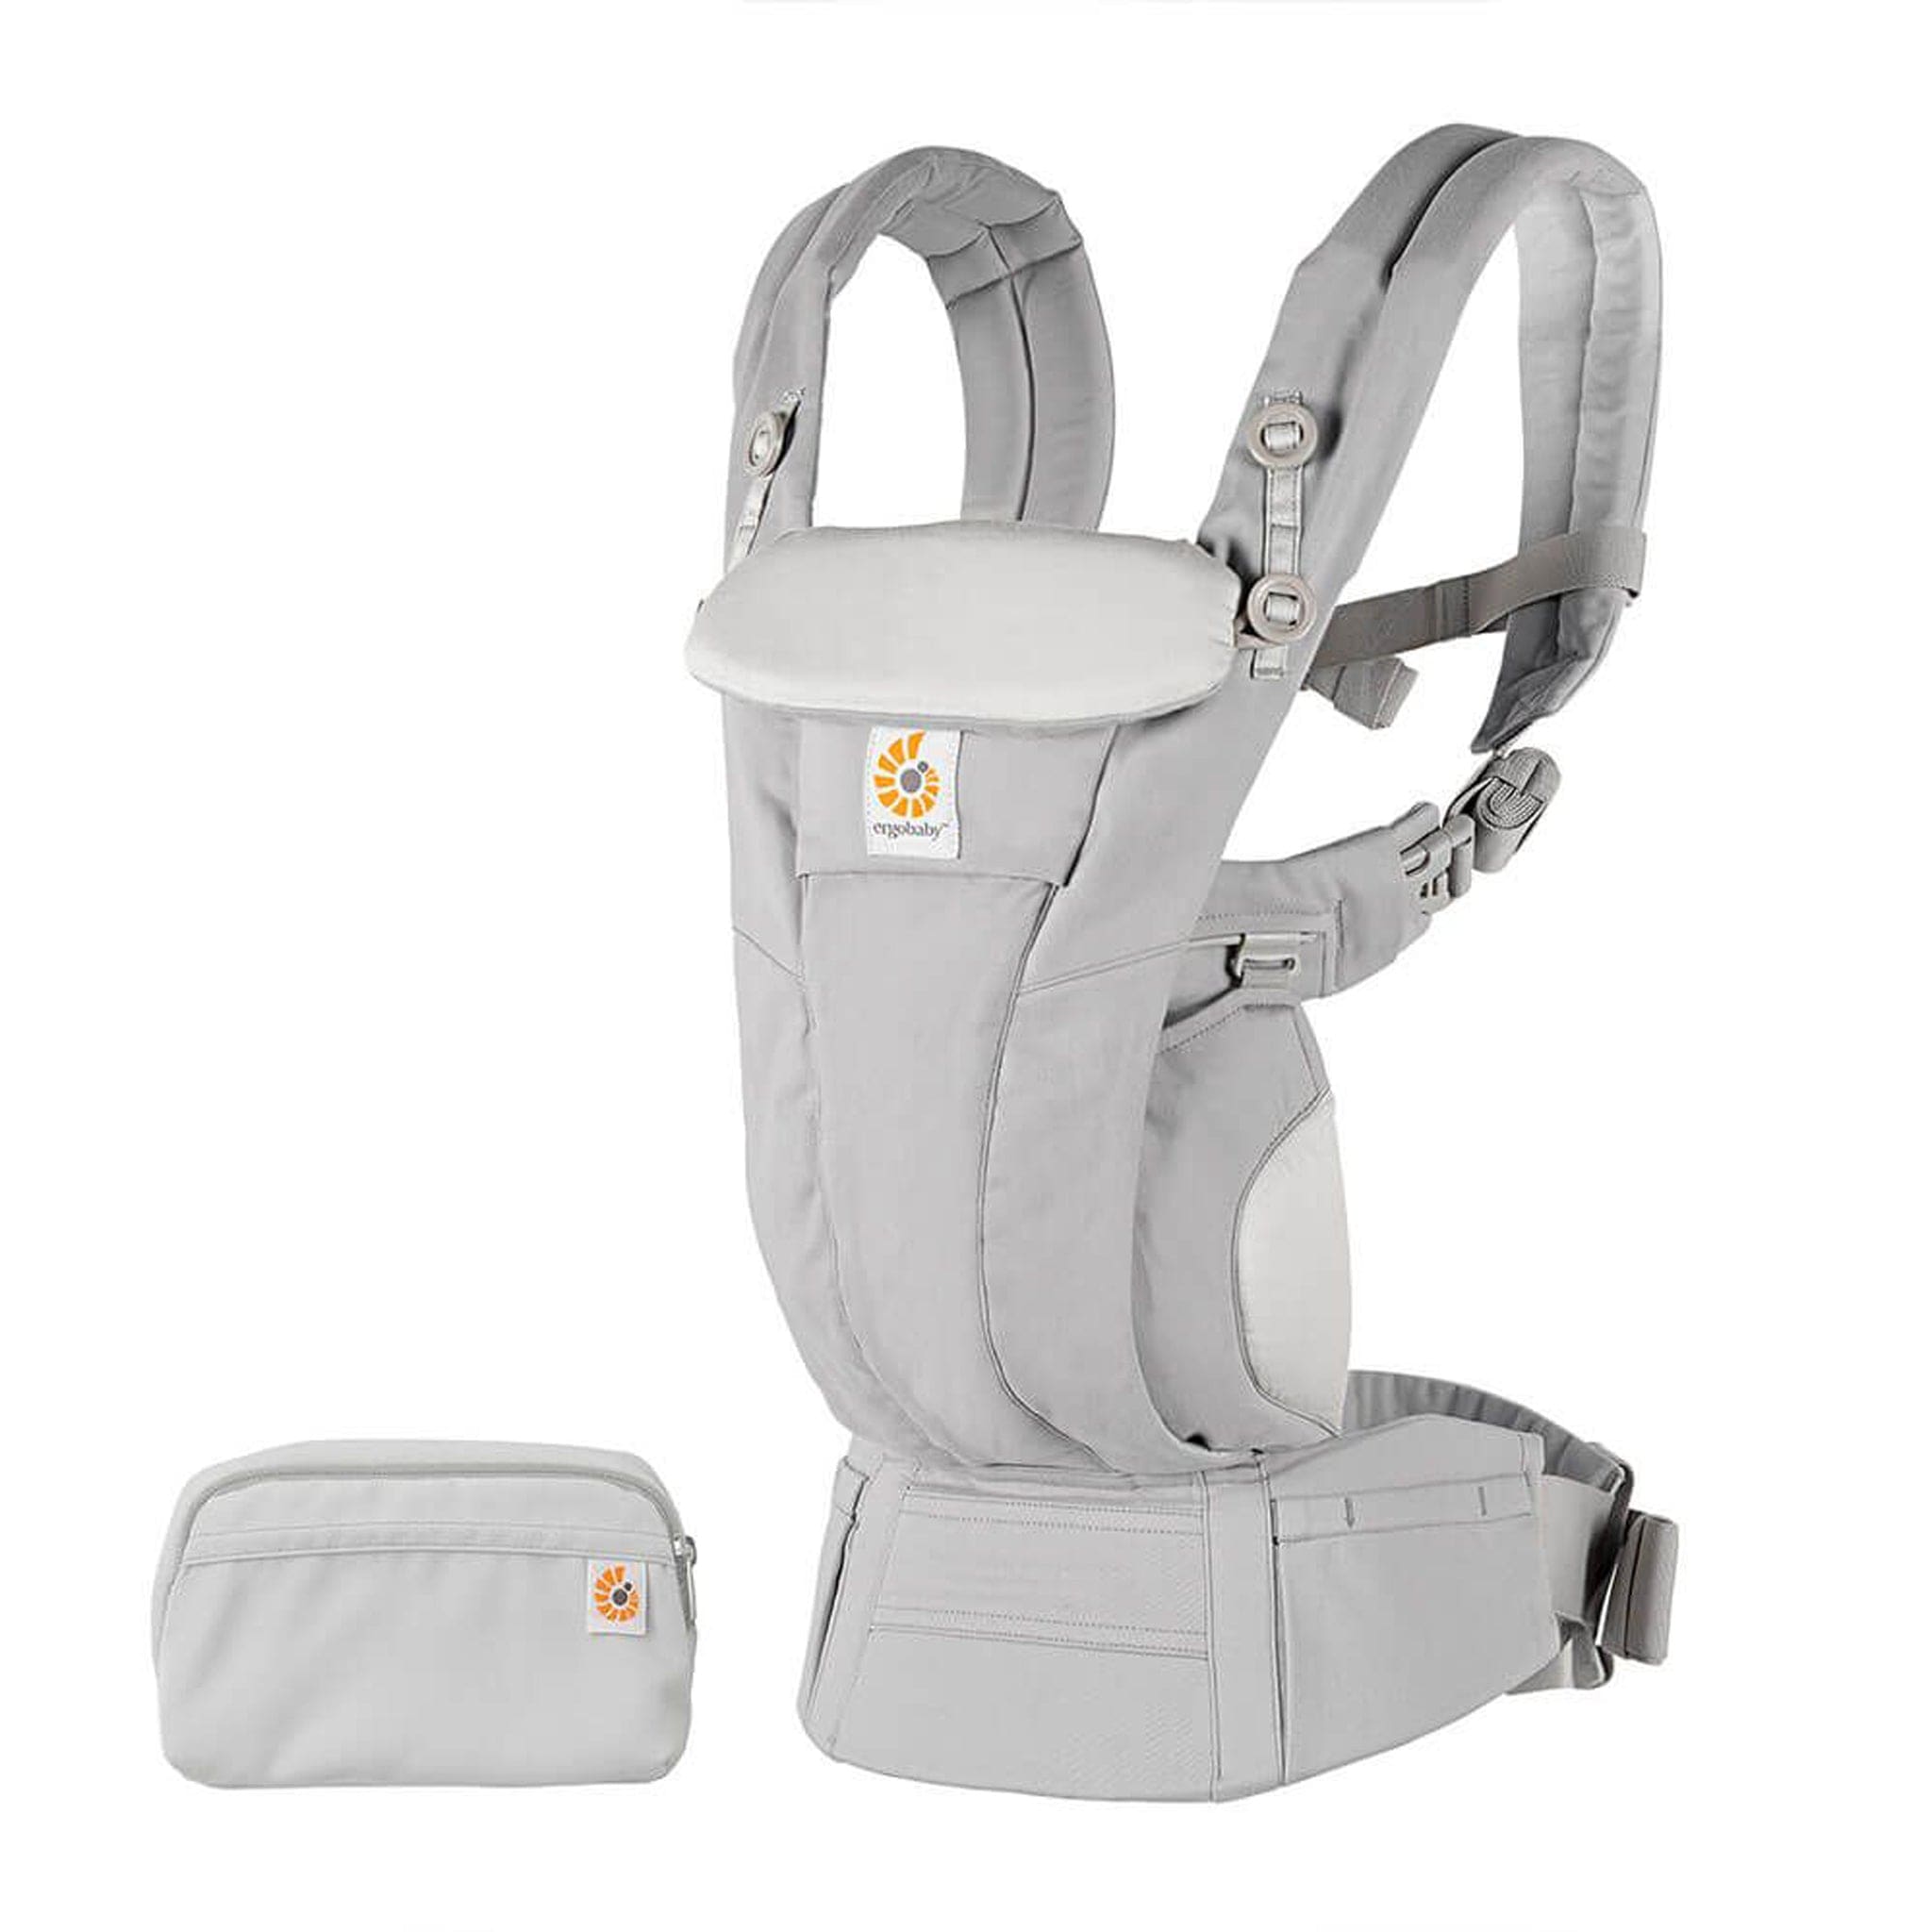 Ergobaby baby carriers Ergobaby Omni Dream Carrier in Pearl Grey BCDRGRY